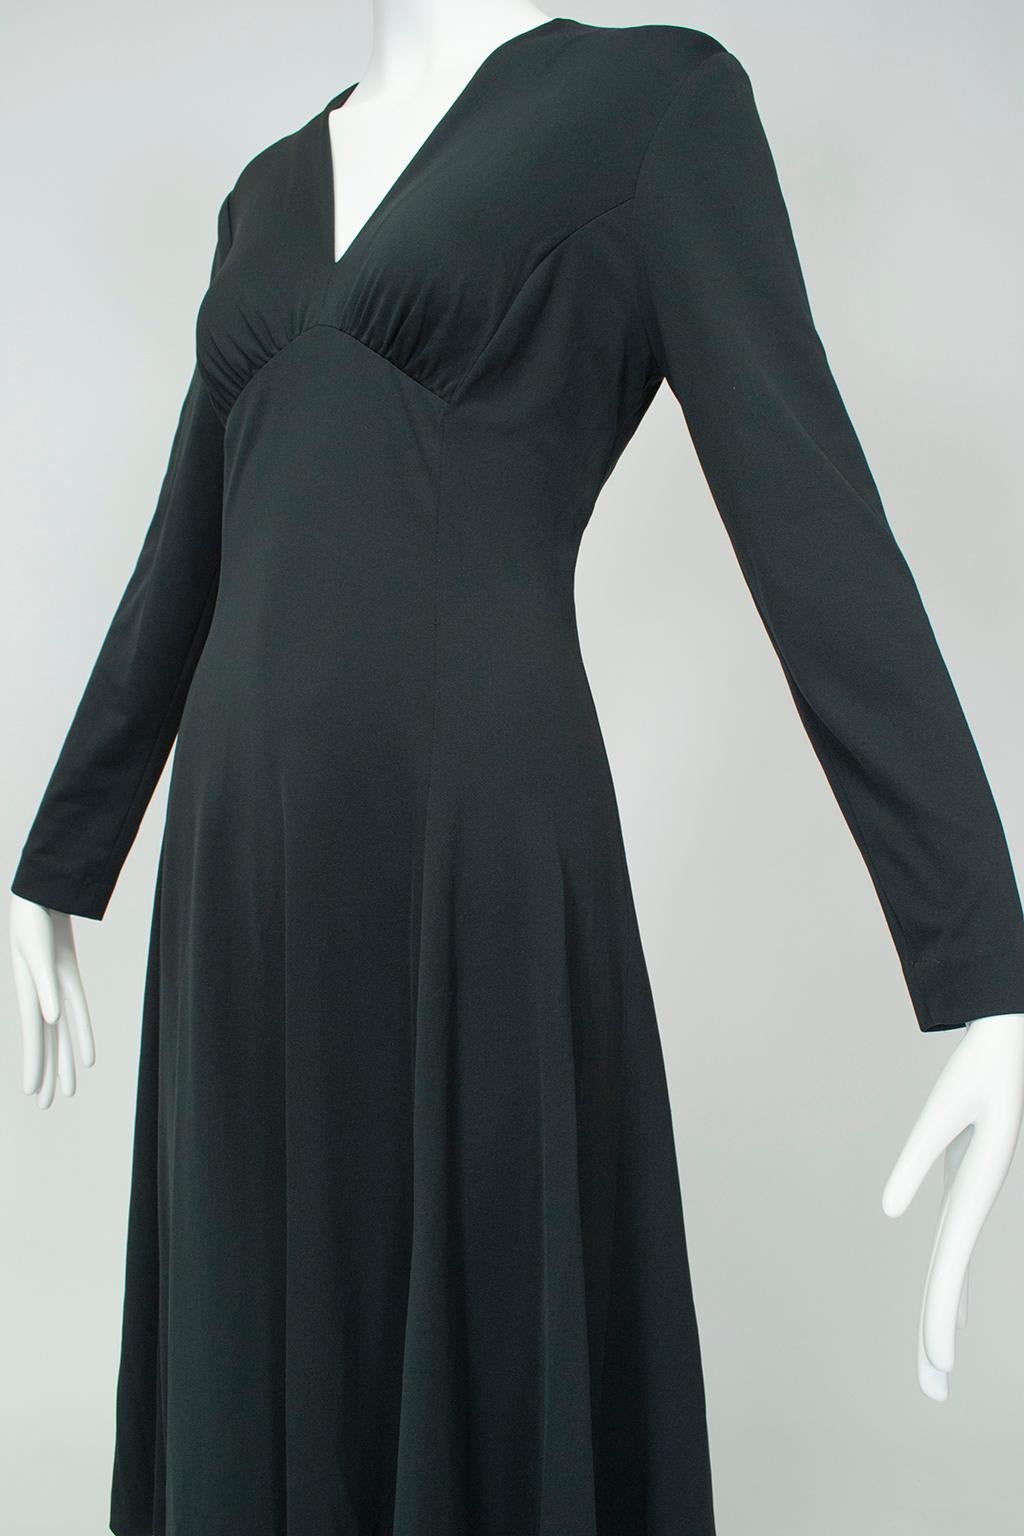 Swirling Black Jersey Disco Day Dress with Plunging Bodice – M, 1960s In Excellent Condition For Sale In Tucson, AZ